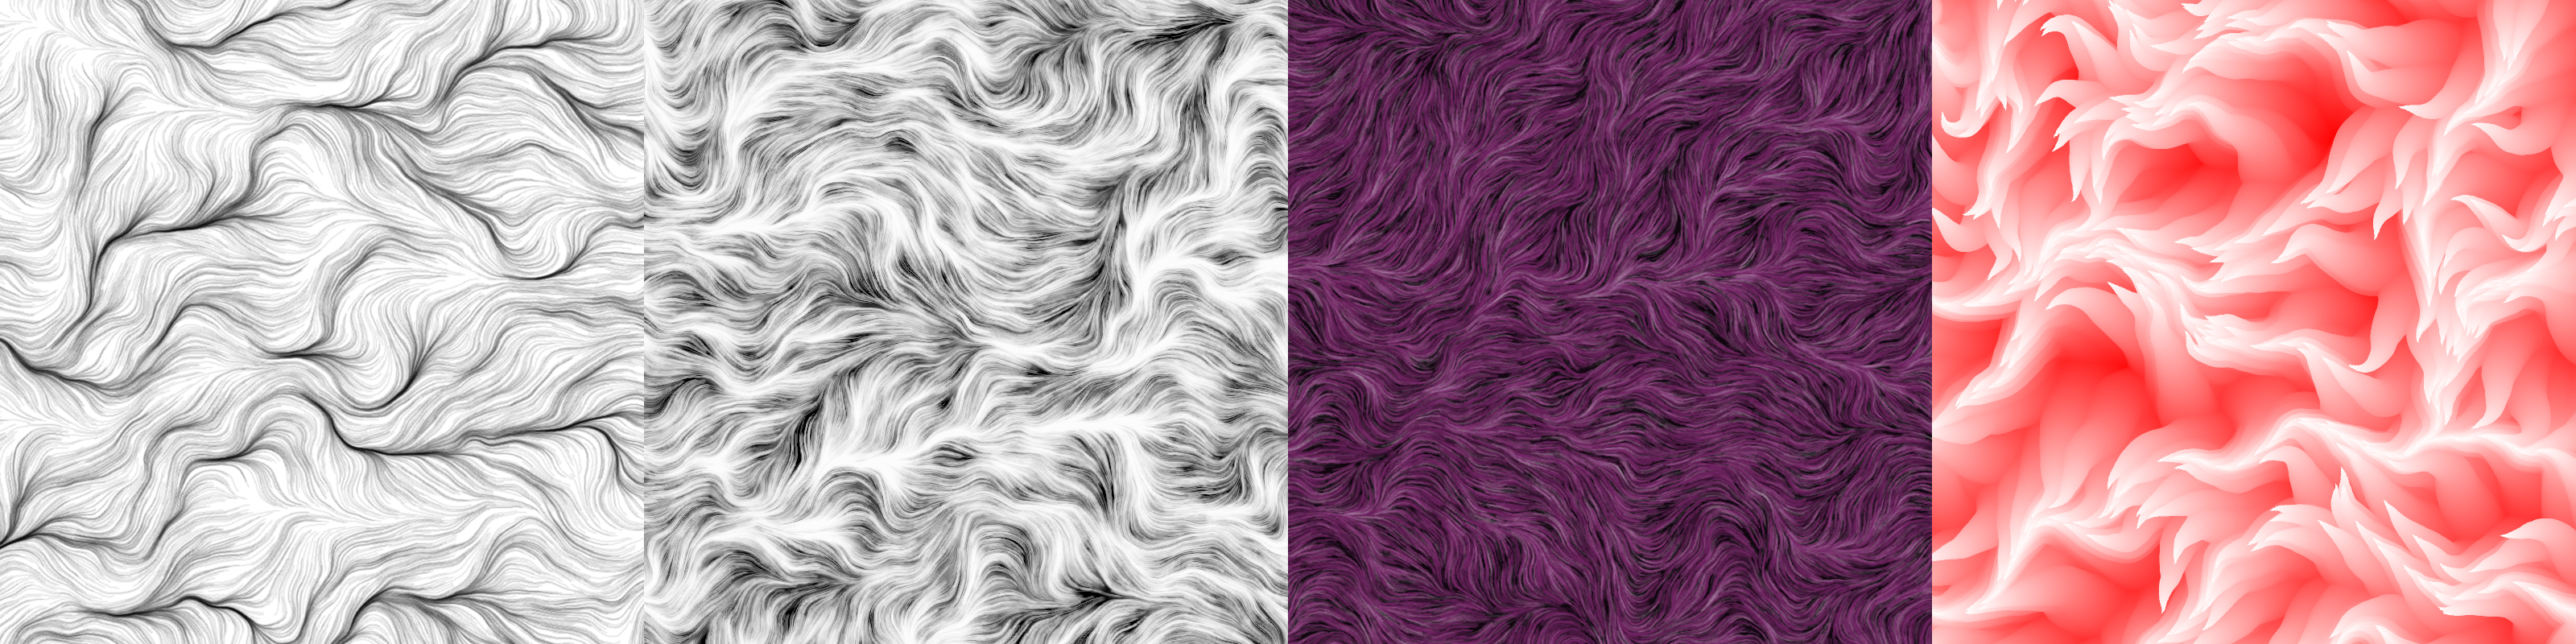 Getting Creative with Perlin Noise Fields